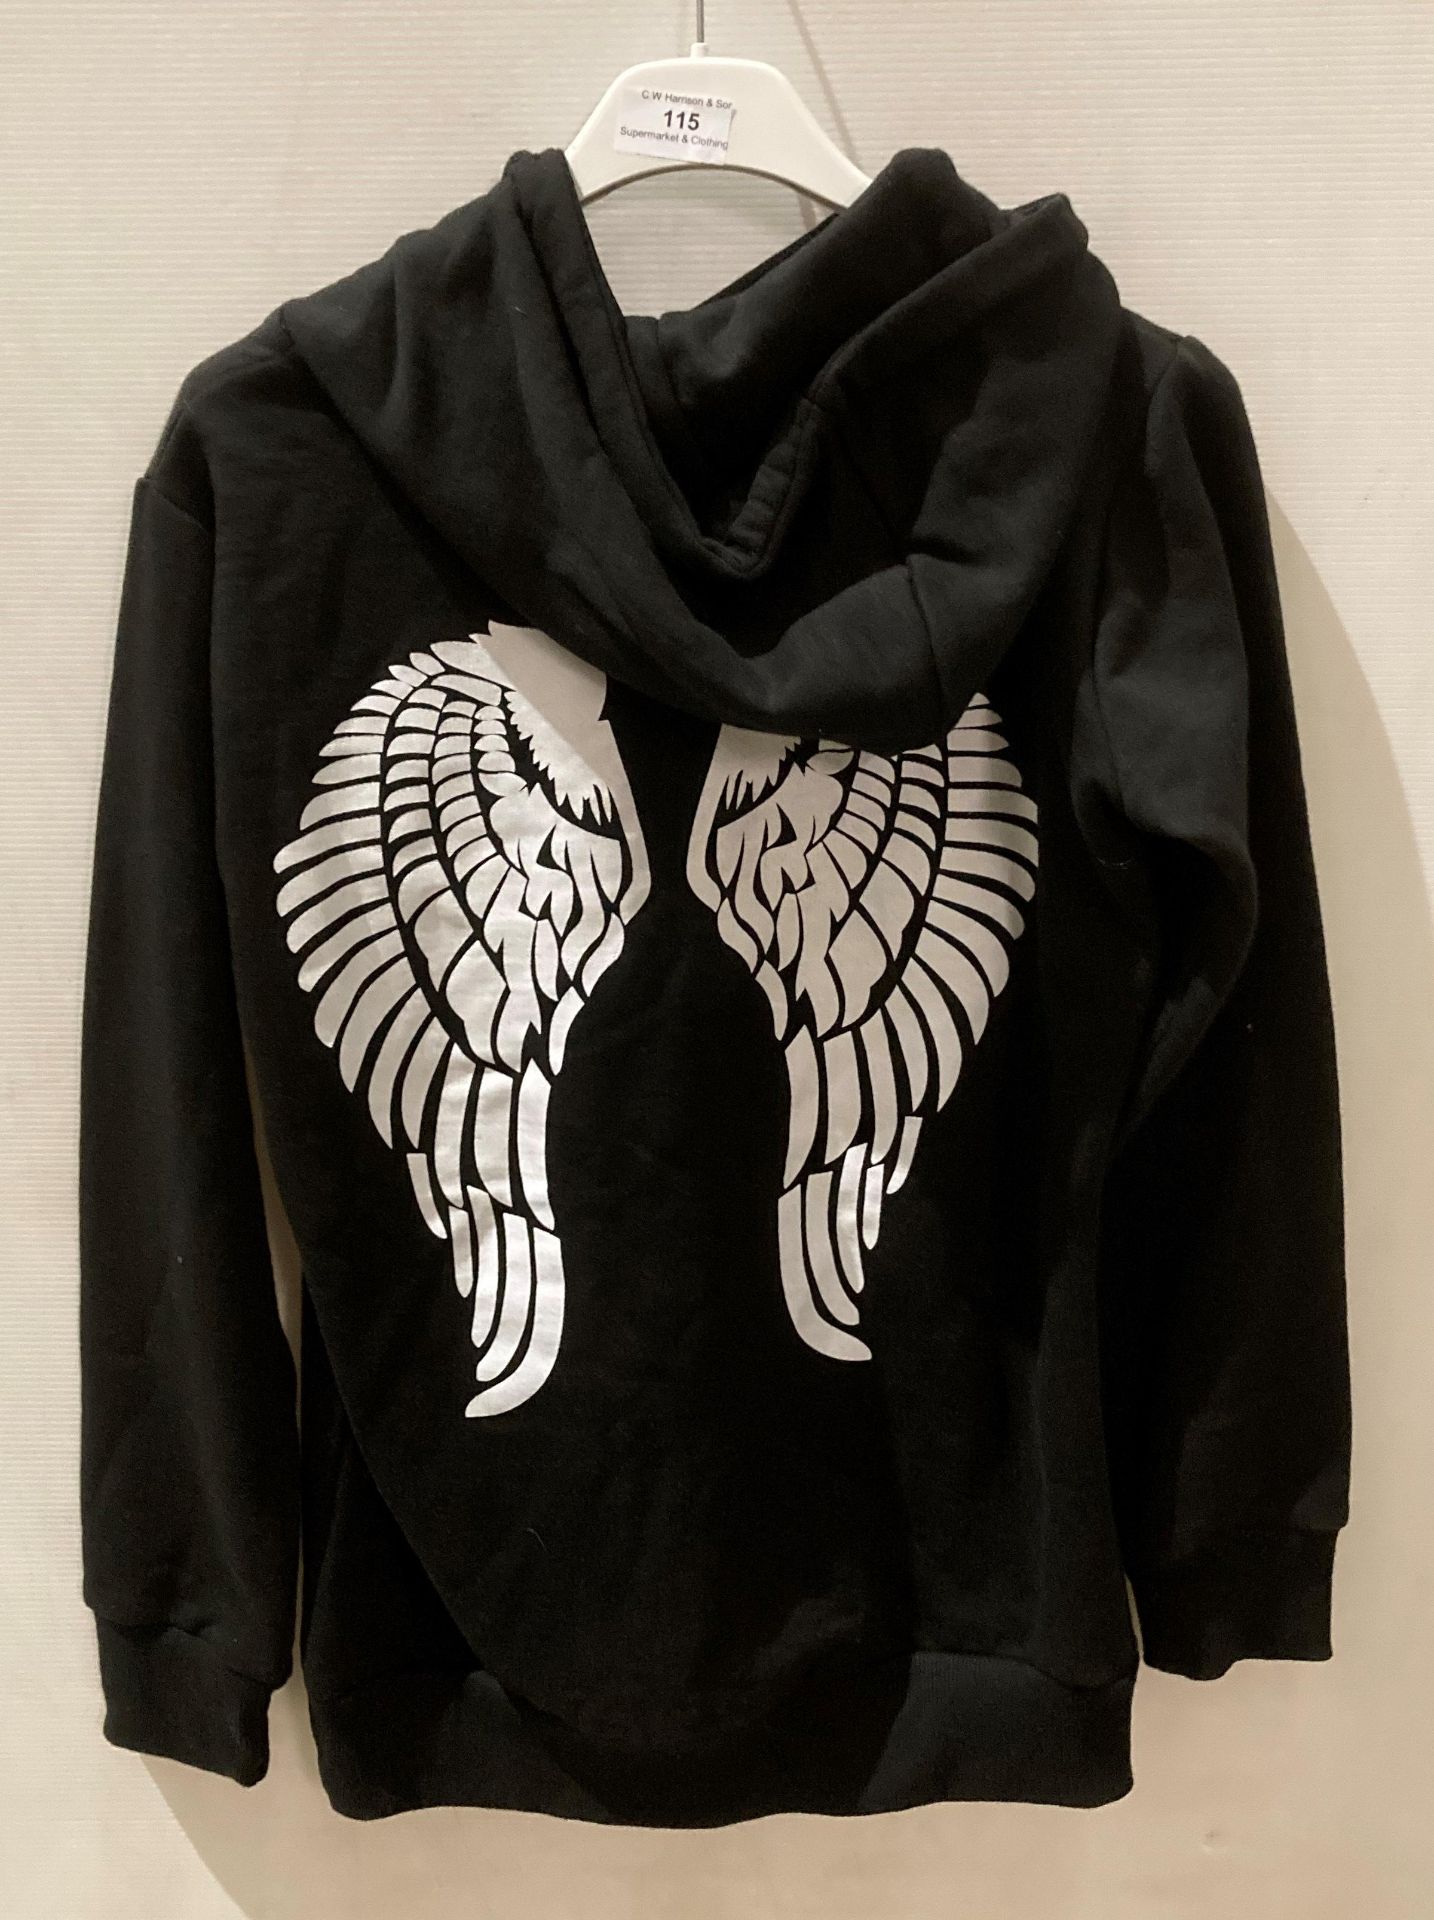 5 x Gypsy Queen black fashion hoodies with white angel wing print to back, sizes S/M, - Image 2 of 2